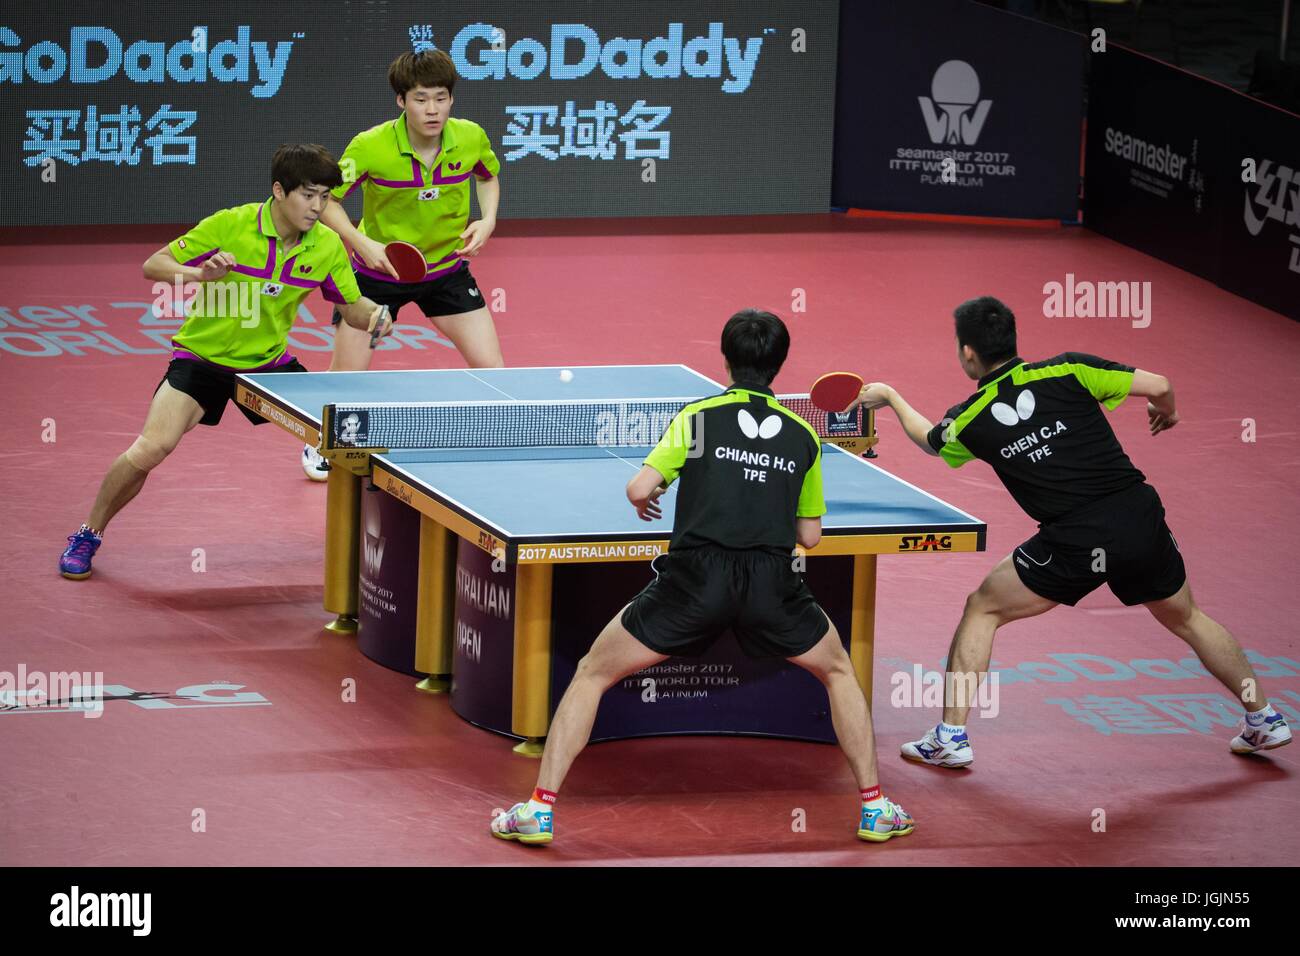 (170707) -- GOLD COAST, July 7, 2017 (Xinhua) -- Jang Woojin (L2)/Park Ganghyeon (L) of South Korea compete during the men's doubles final against Chen Chien-An (R)/Chiang Hung-Chieh of Chinese Taipei at the ITTF World Tour Platinum Australia Open in Gold Coast, Australia, July 7, 2017. (Xinhua/Zhu Hongye) Stock Photo